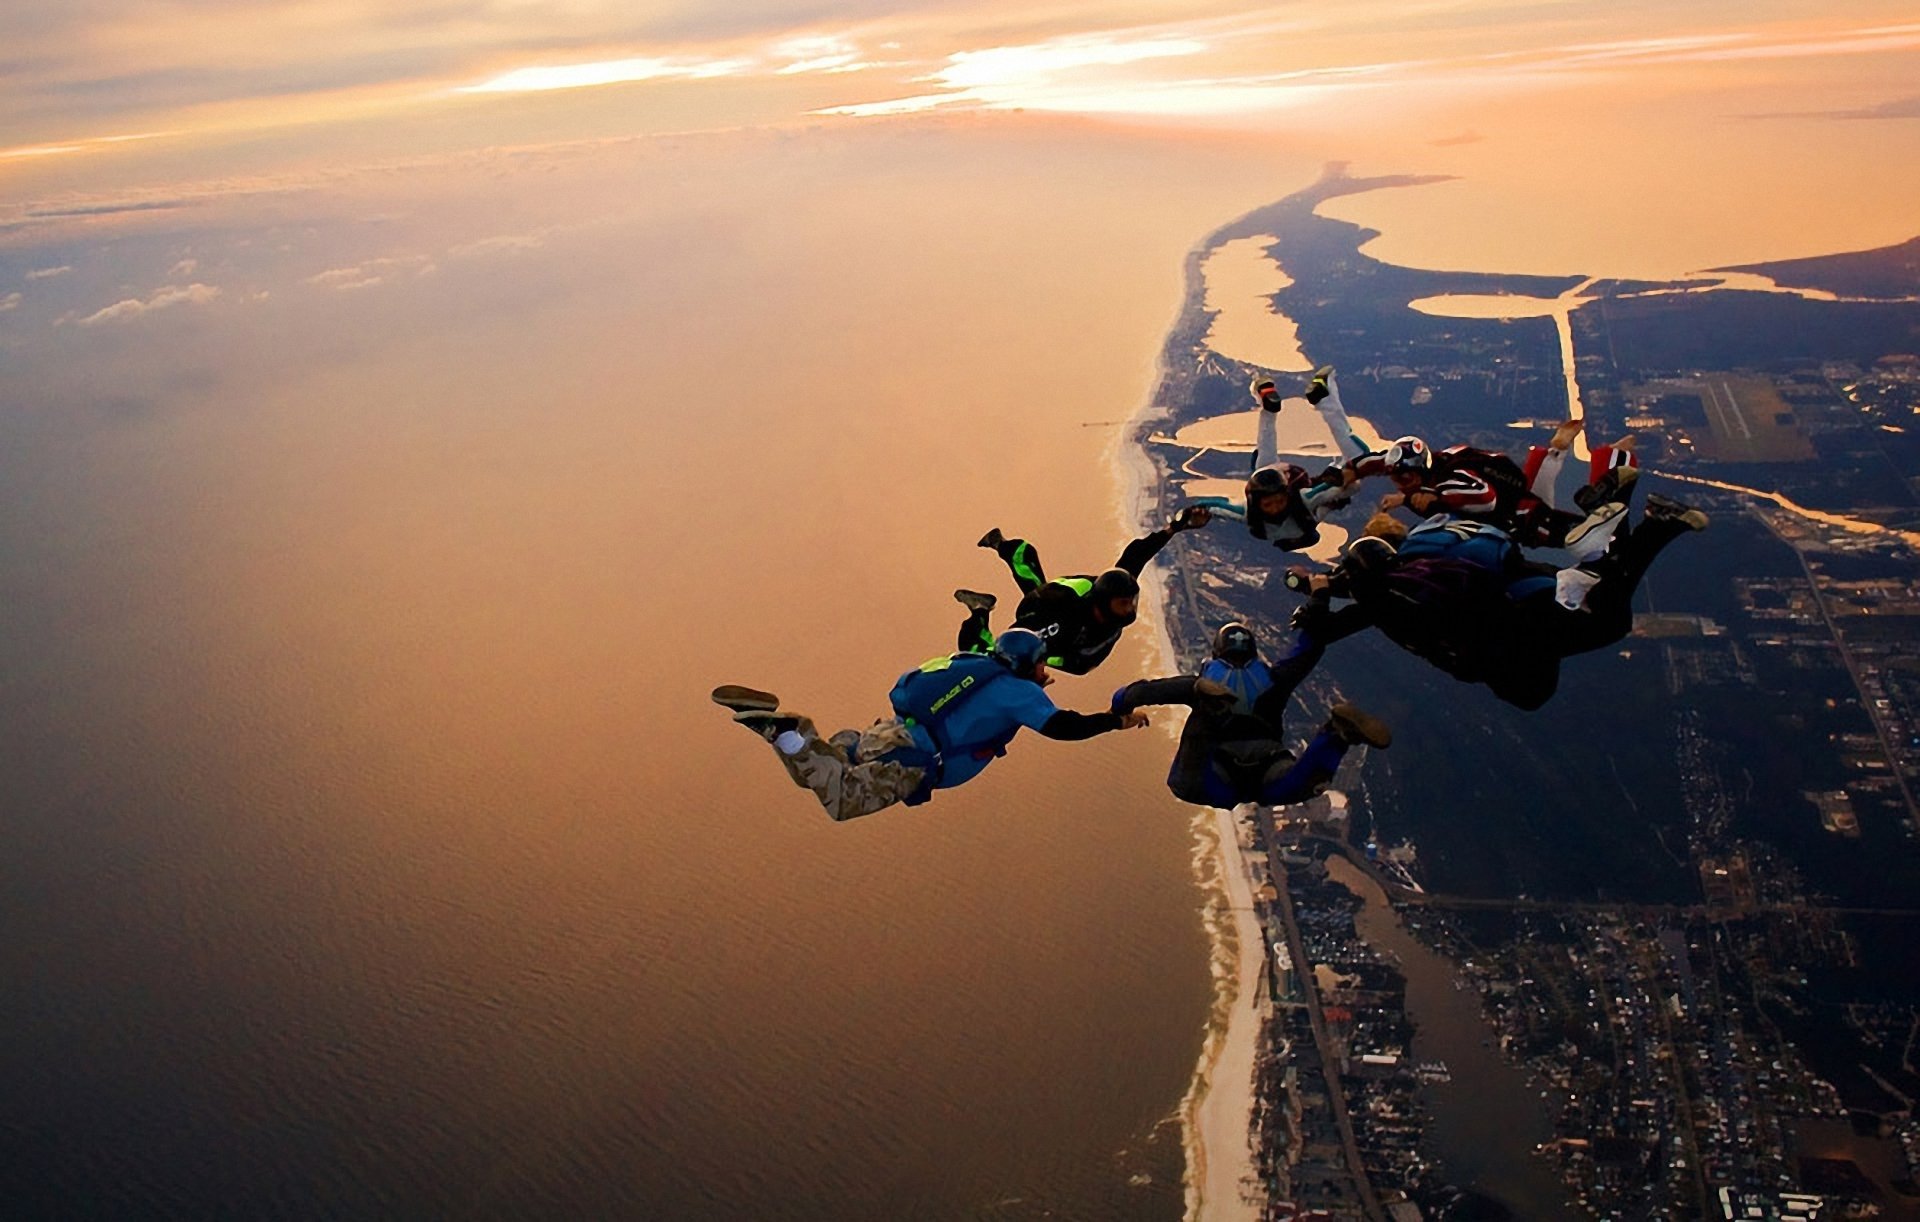 Skydiving Photo